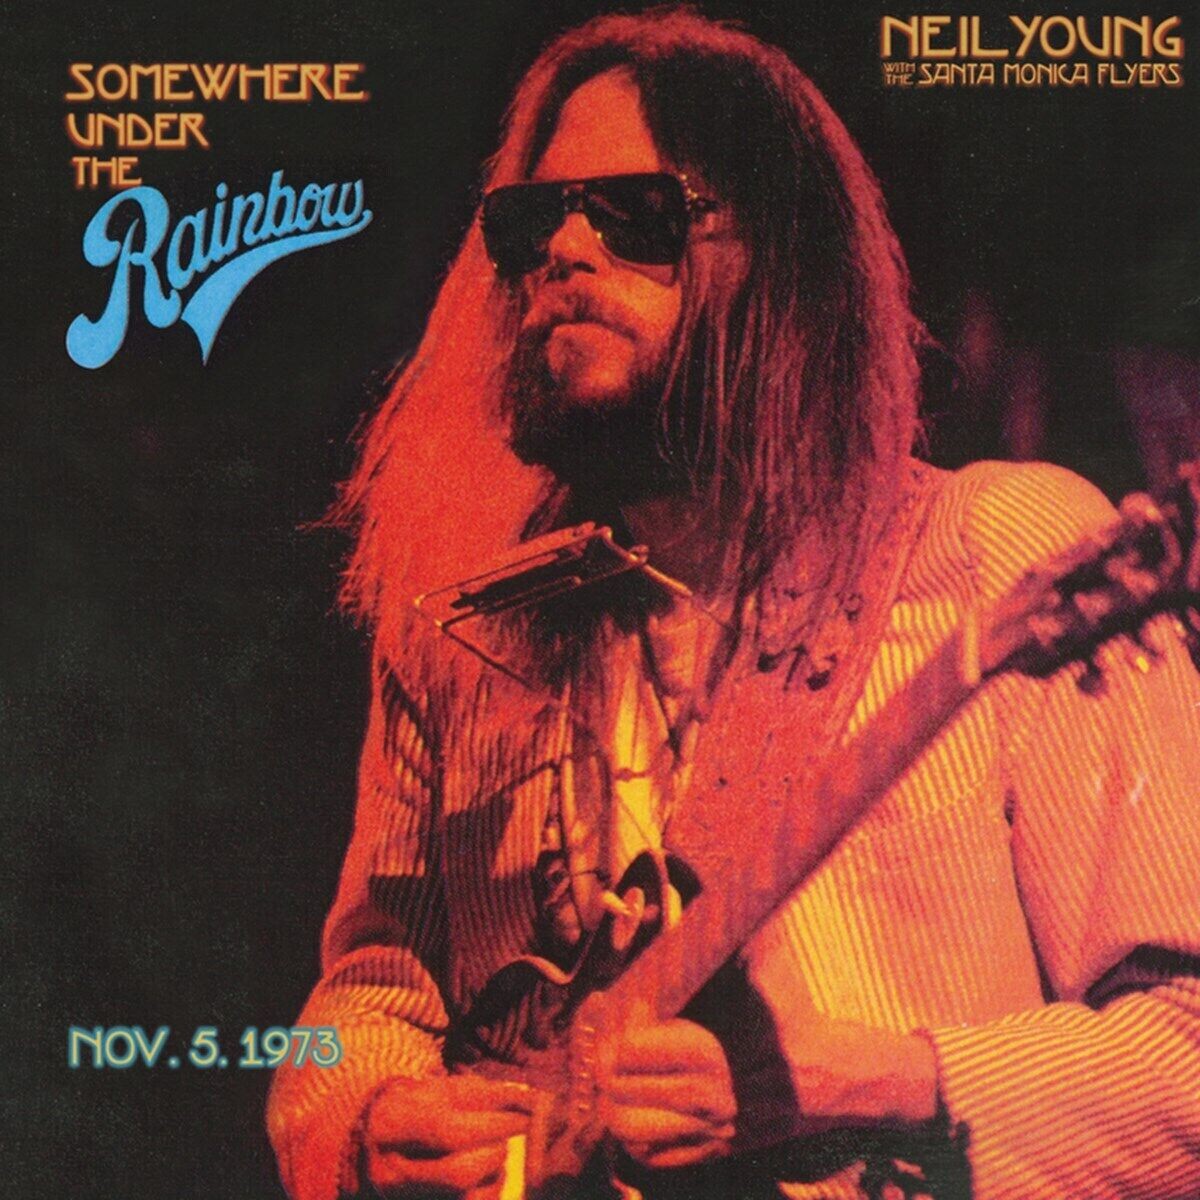 Neil Young With The Santa Monica Flyers - Somewhere Under The Rainbow - CD